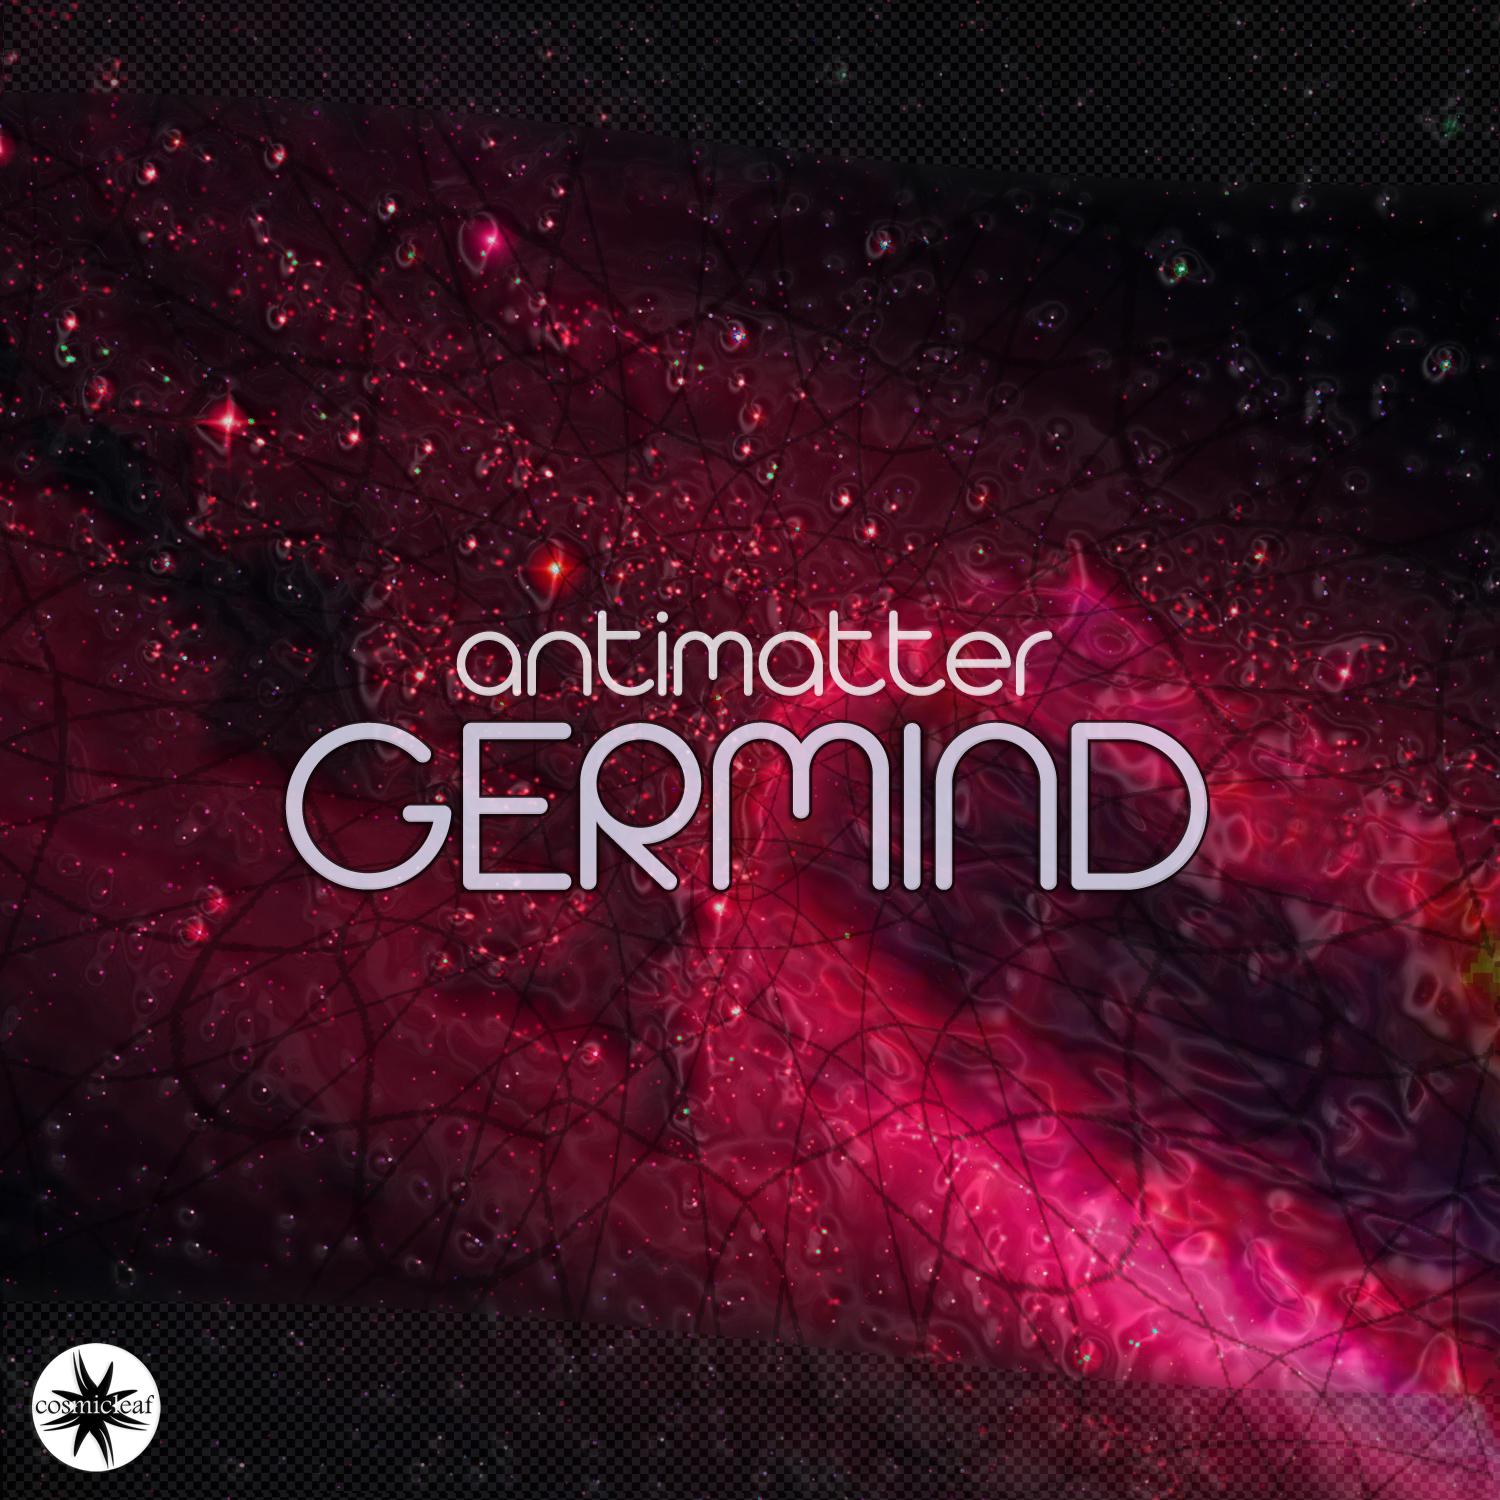 Germind - In the Dawn of Time